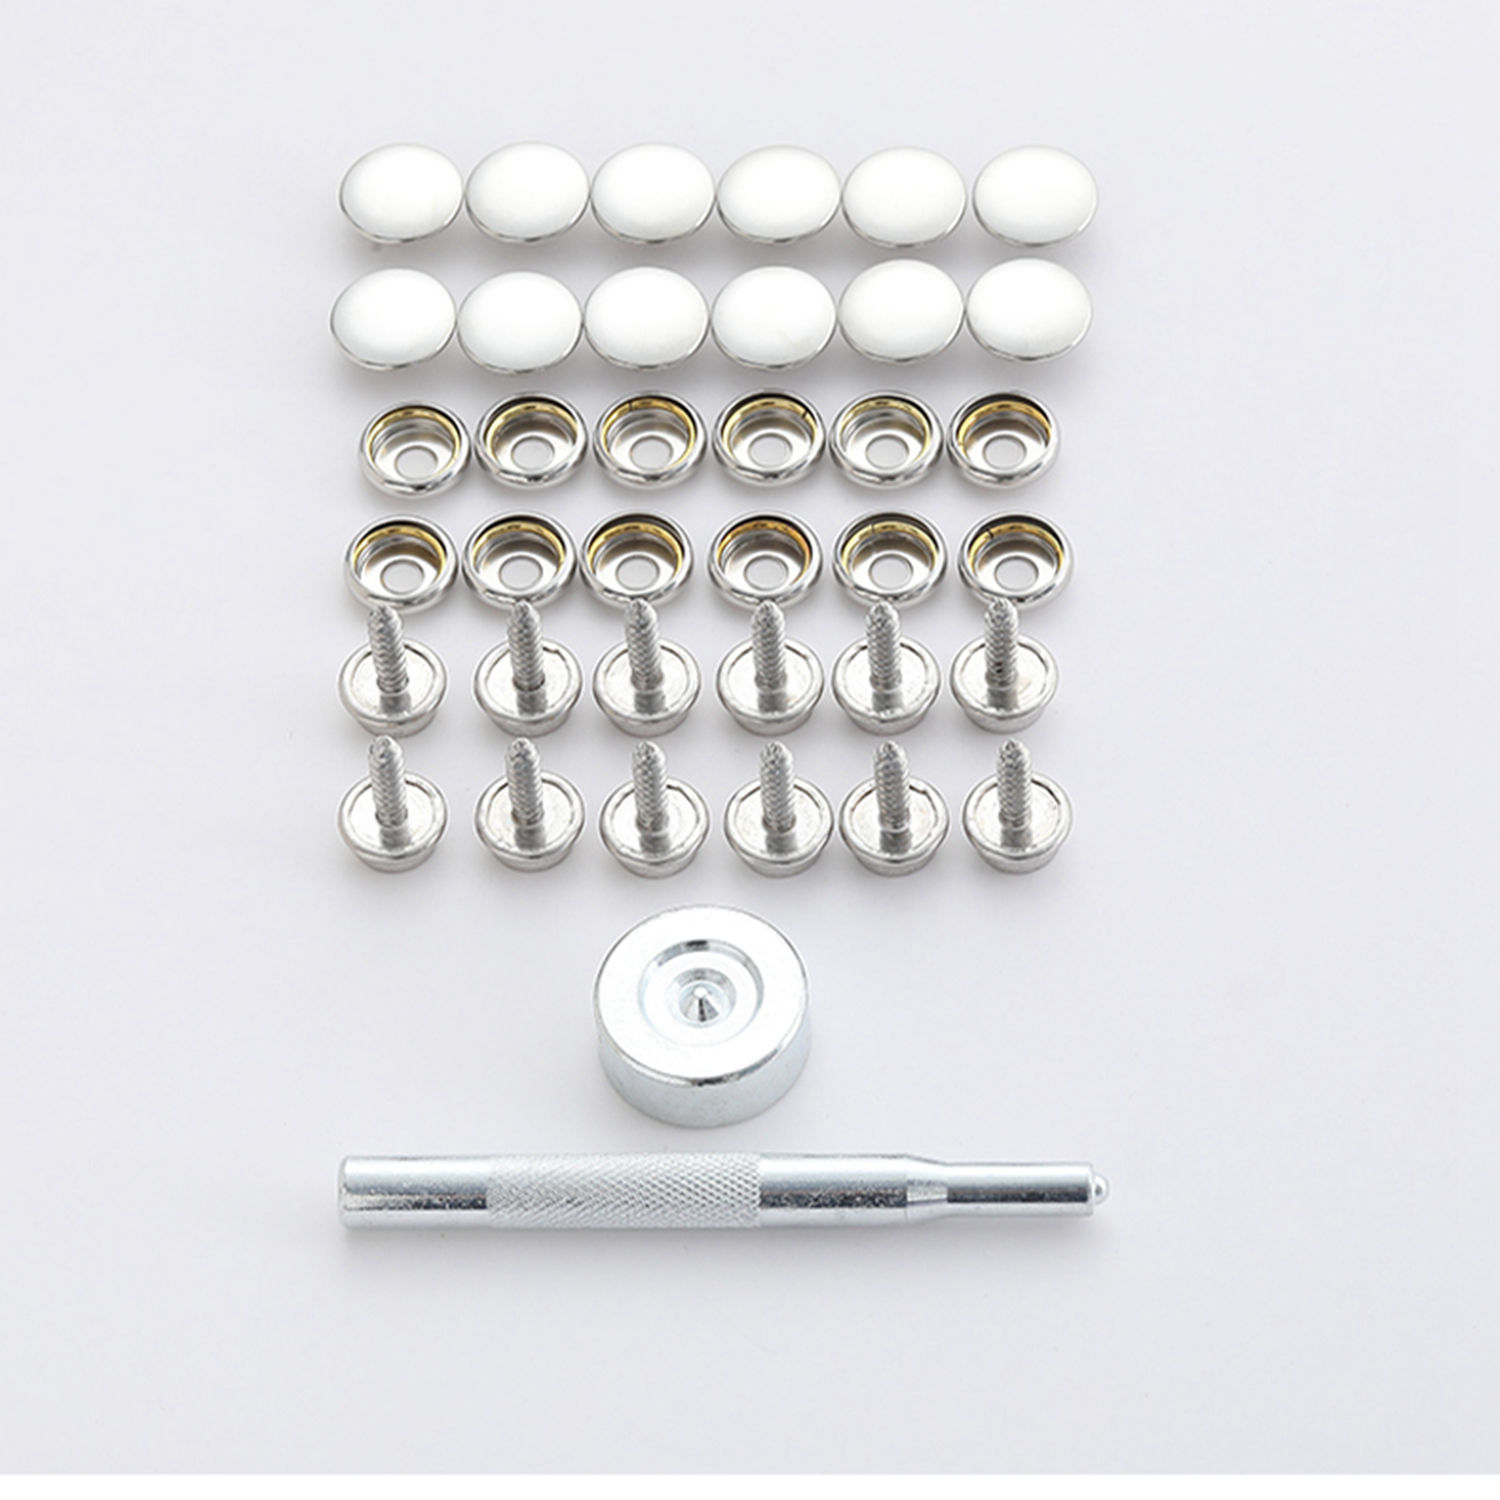 150Pcs Screw Snaps Fastener Kit with Tool Marine Grade Stainless Steel  Black Button Snaps Canvas Snaps for Boat Tent Leather